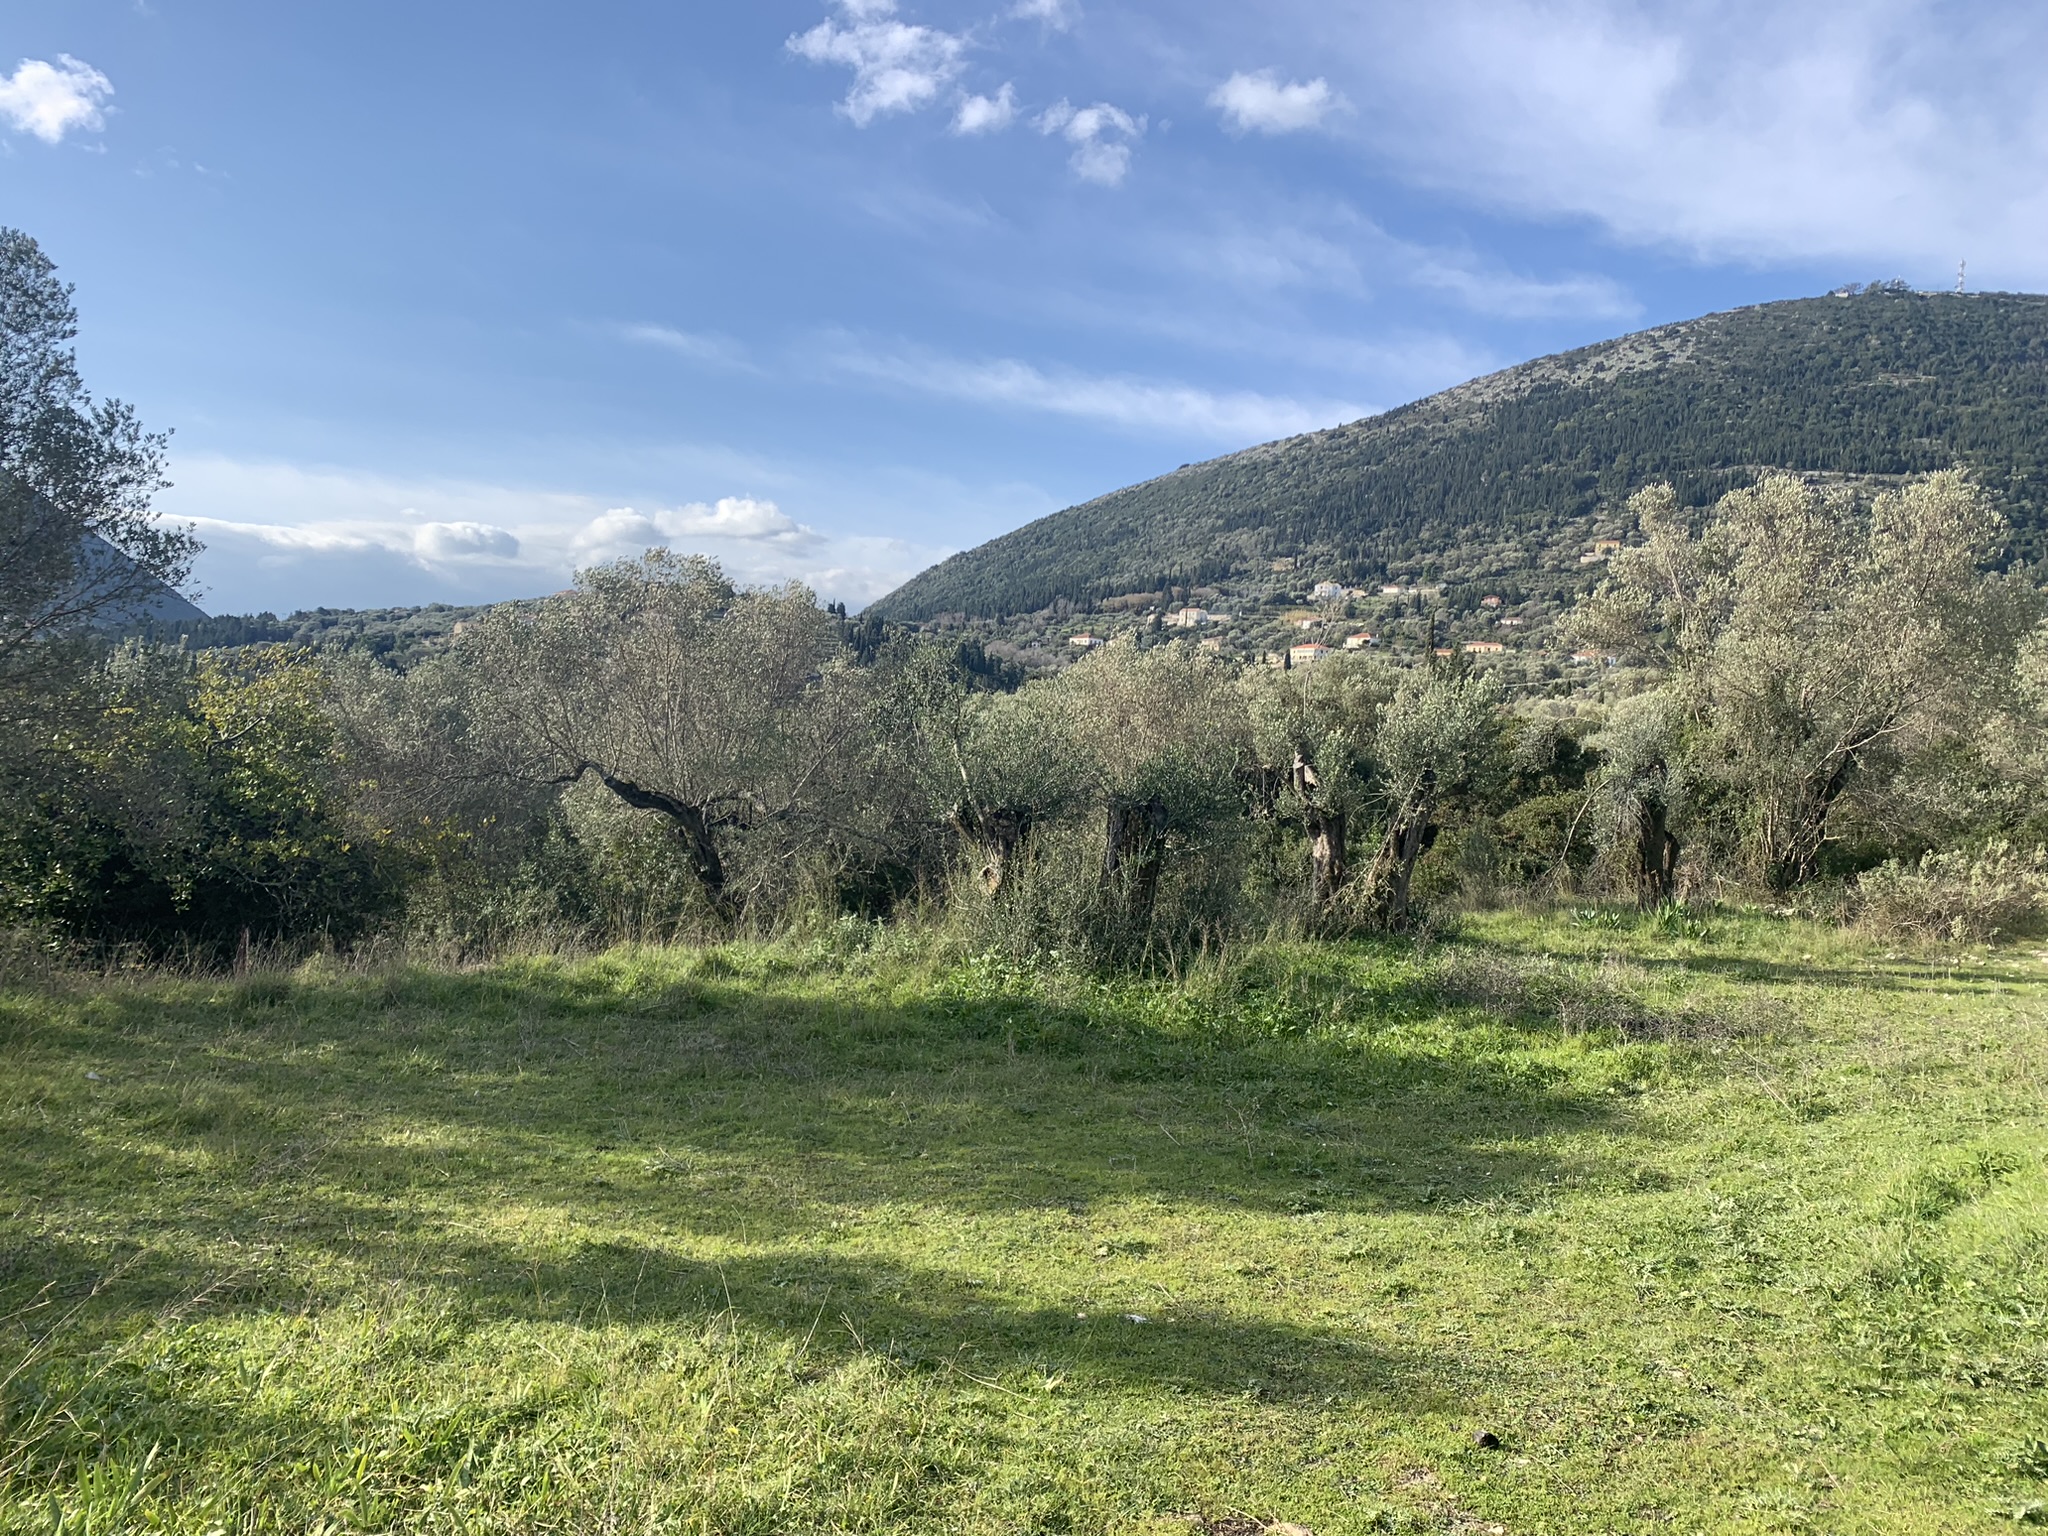 Terrain and landscape of land for sale, Ithaca Greece, Lahos